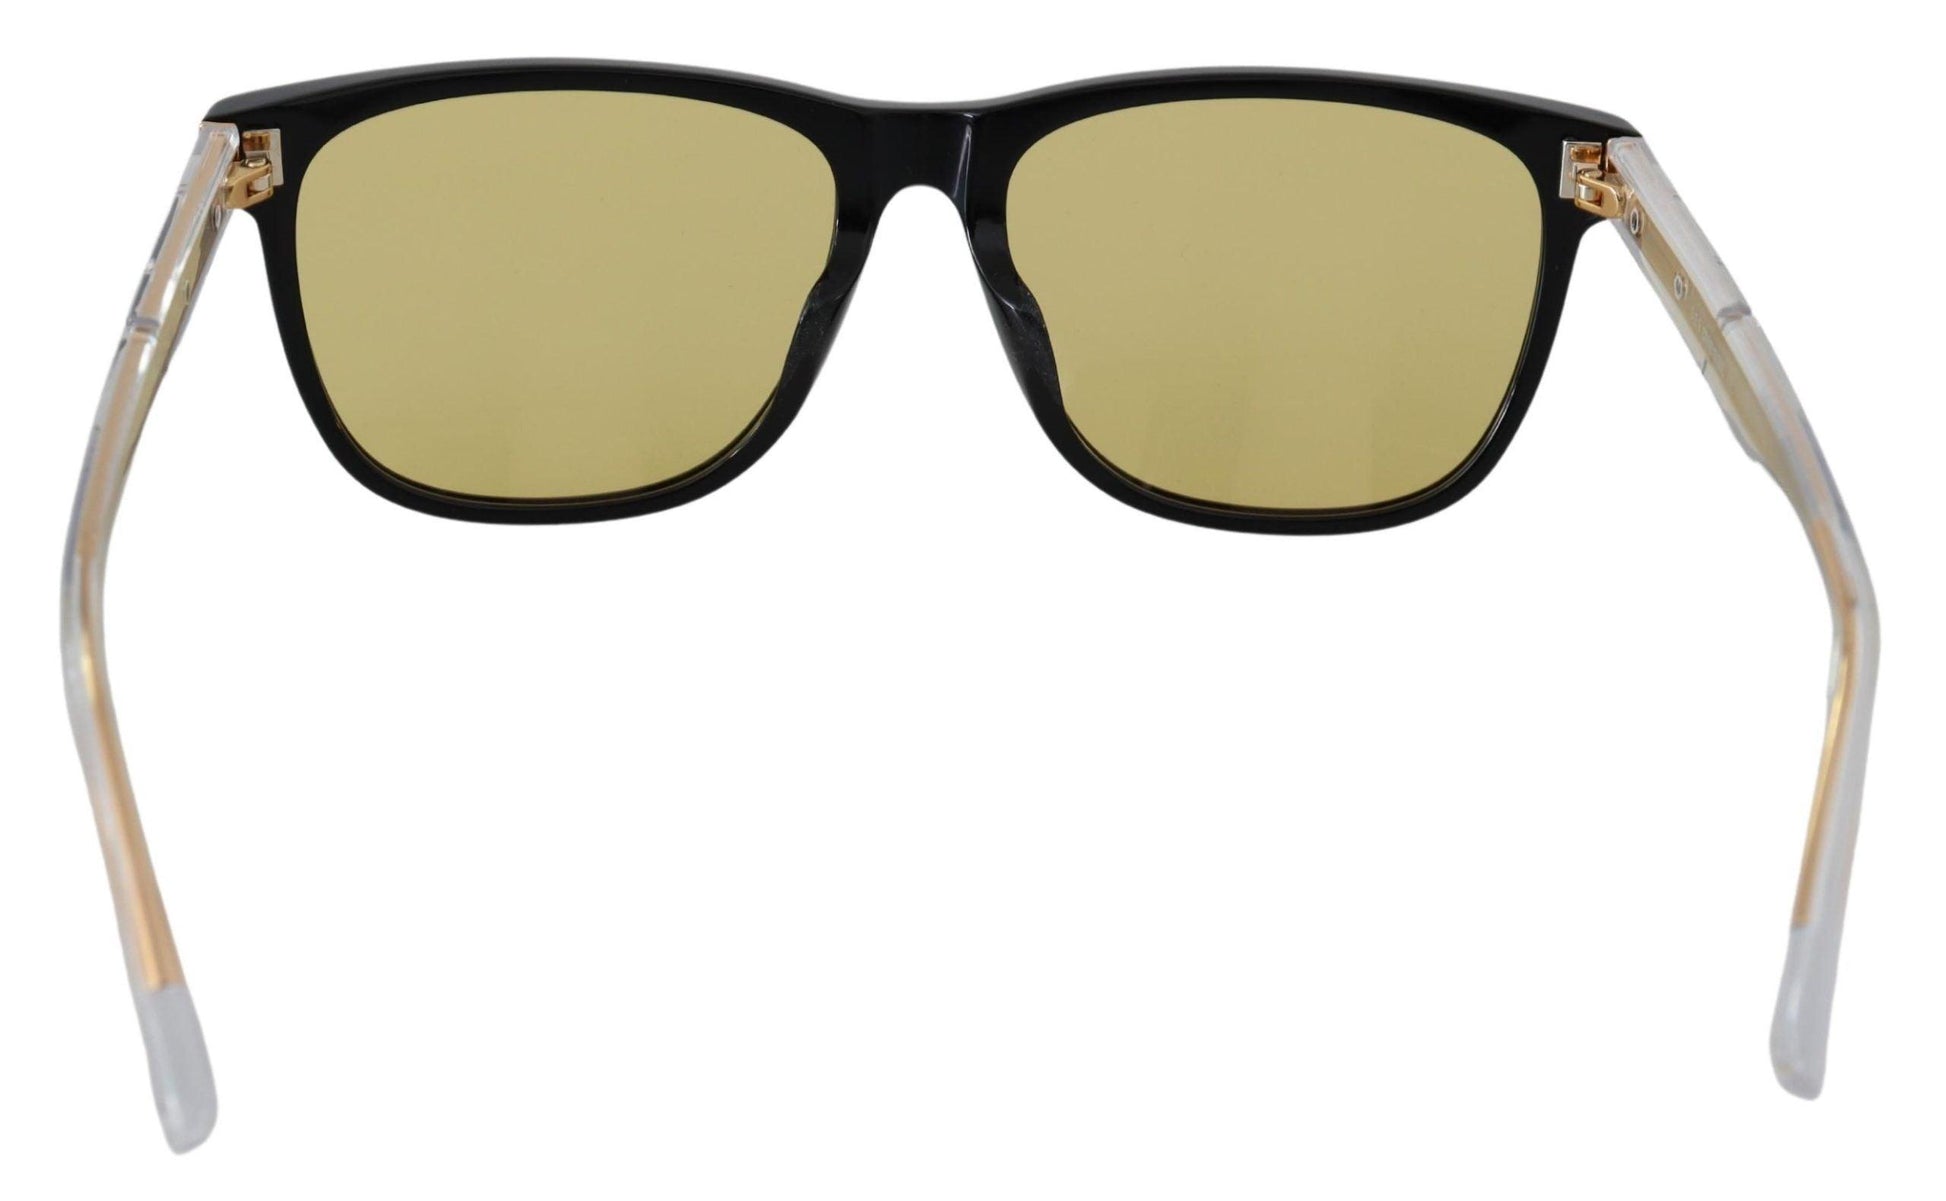 Diesel Chic Black Acetate Sunglasses with Yellow Lenses - PER.FASHION